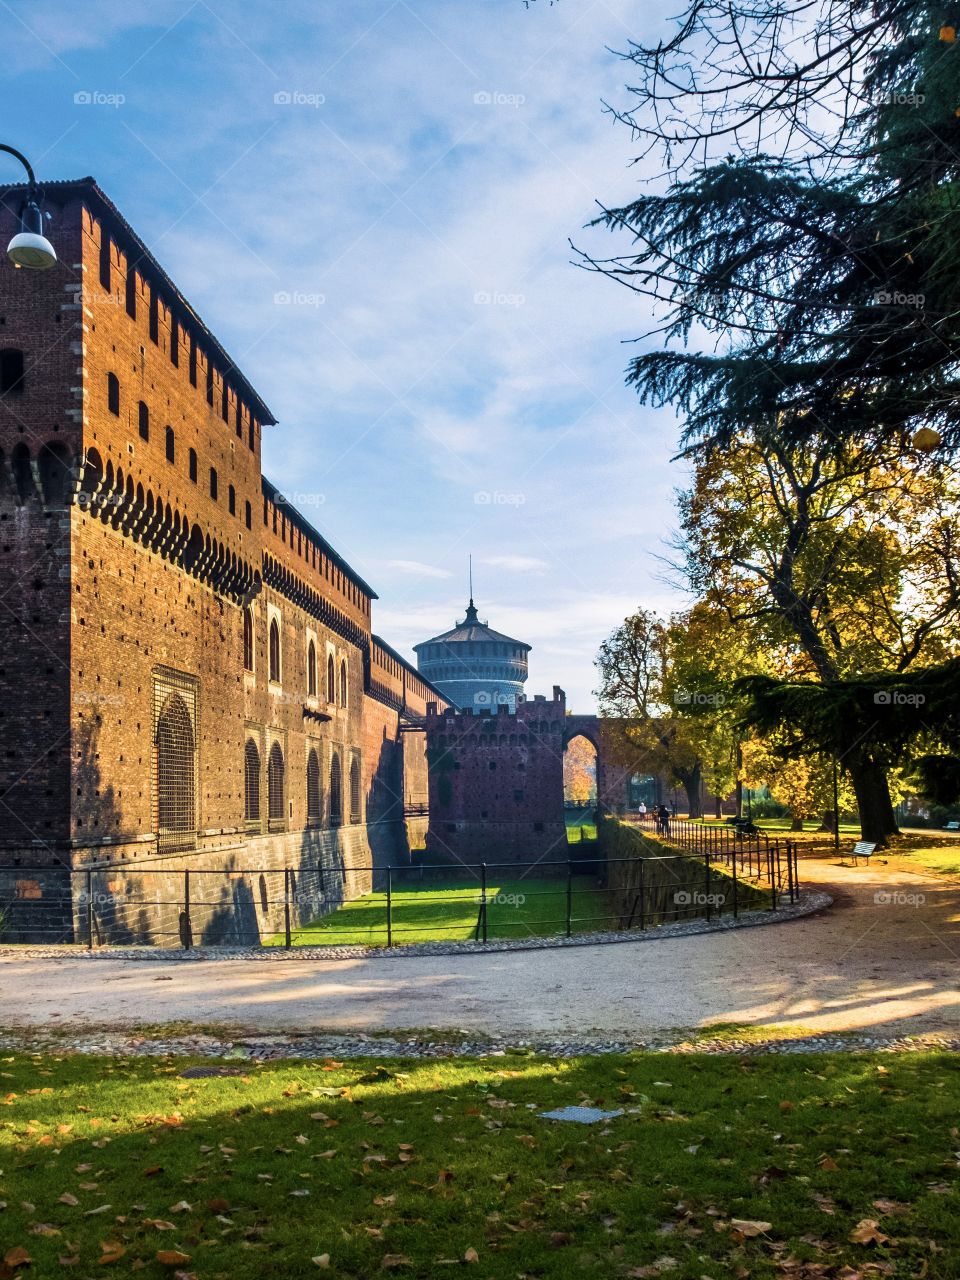 Sforza Castle (Italian: Castello Sforzesco) is in Milan, northern Italy. It was built in the 15th century by Francesco Sforza, Duke of Milan, on the remnants of a 14th-century fortification.